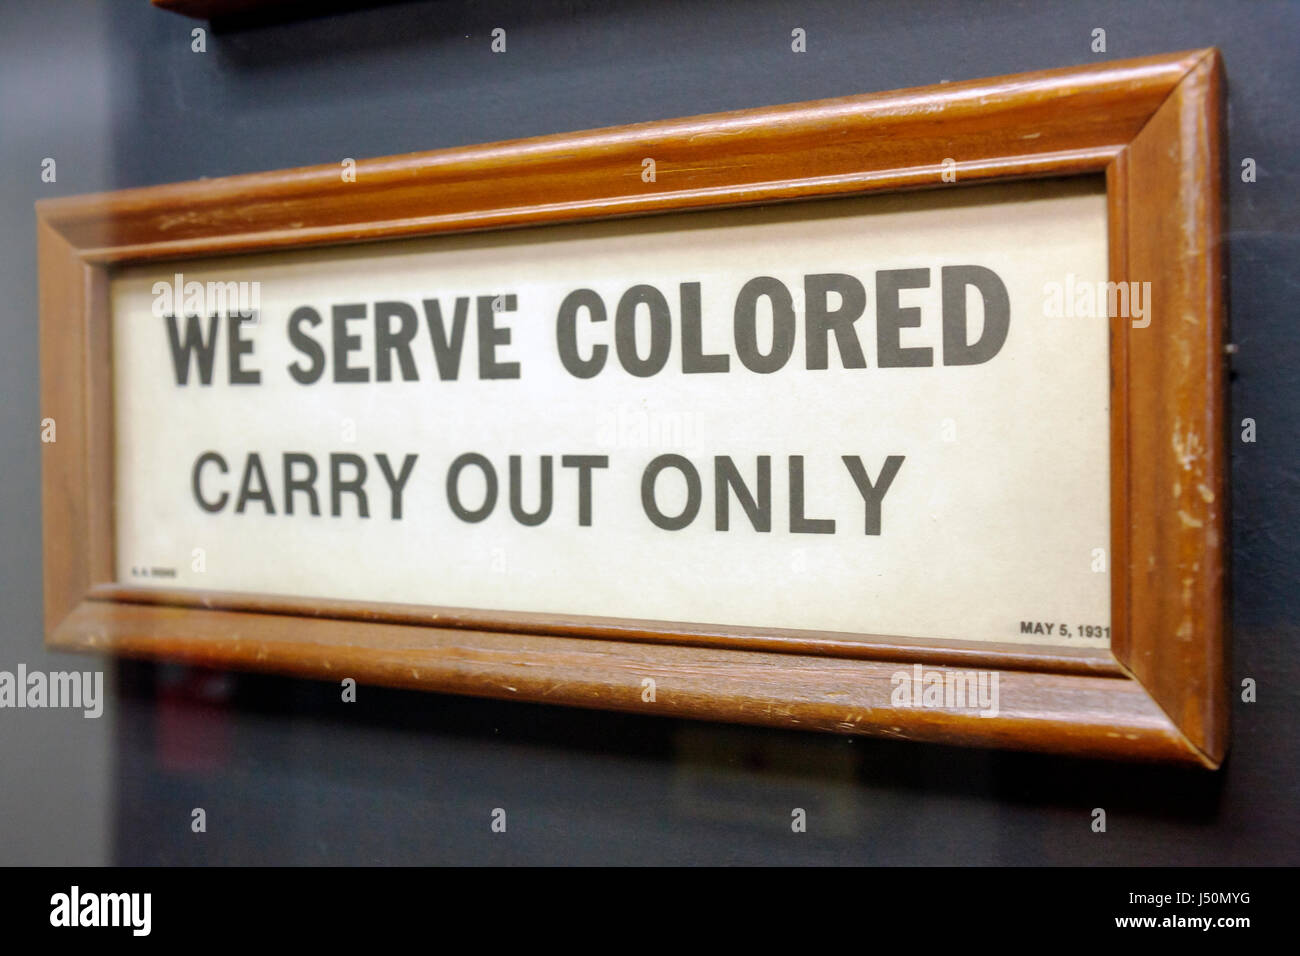 Alabama,Dallas County,Selma,National Voting Rights Museum & Institute,Civil Rights Movement,segregation,Black History,sign,we serve colored carry out Stock Photo